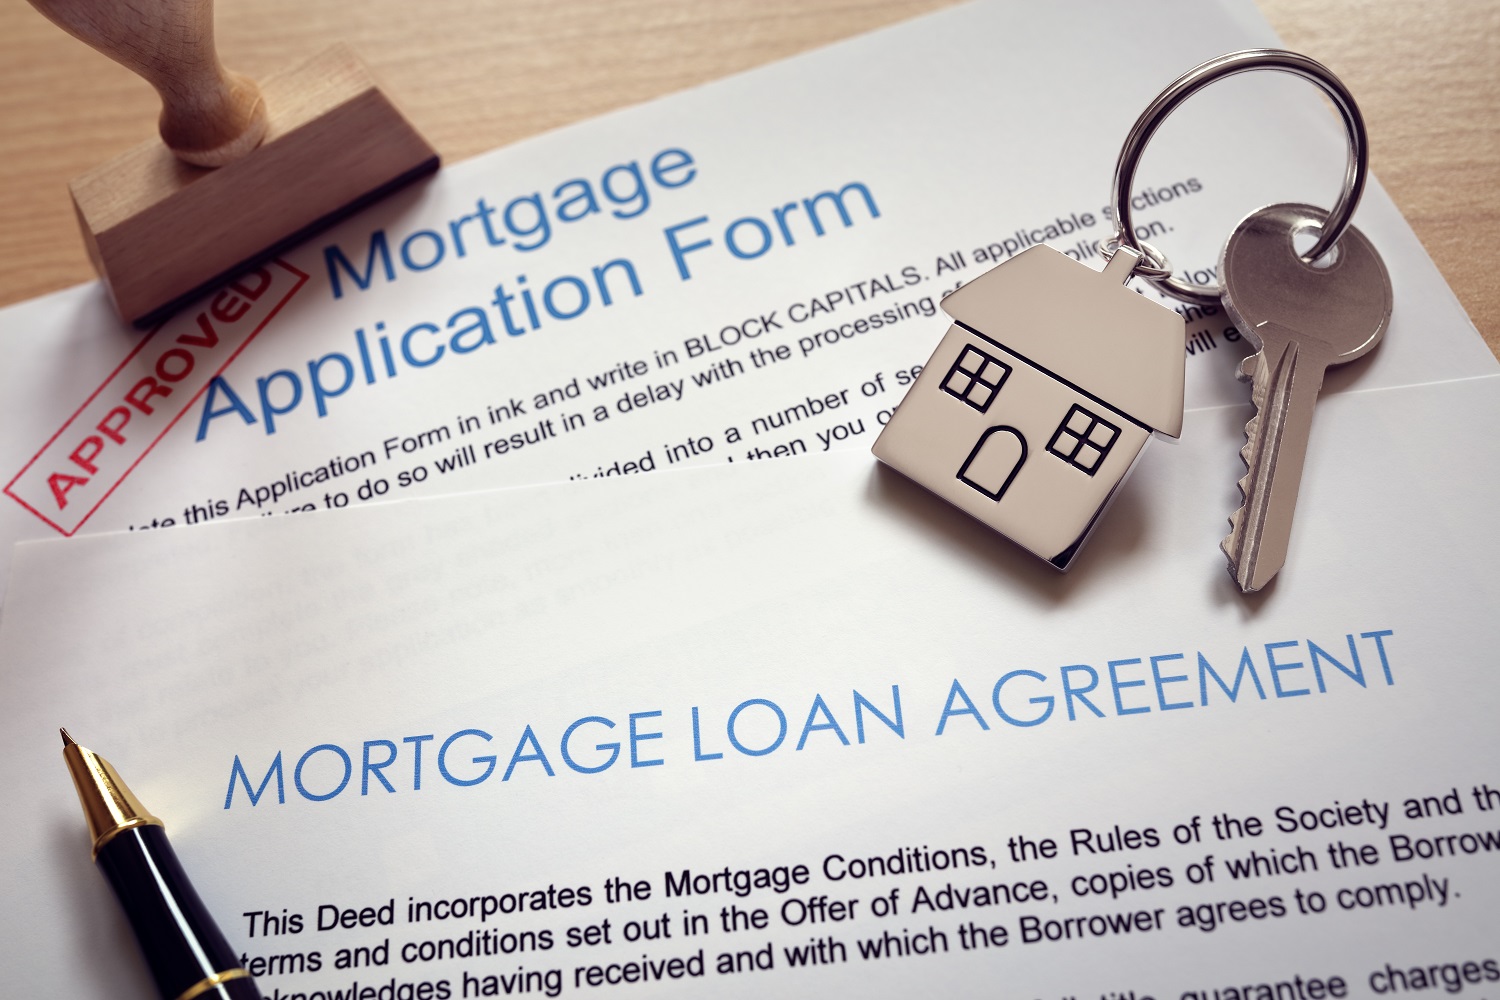 4 Things Not to Do When You Apply for a Mortgage